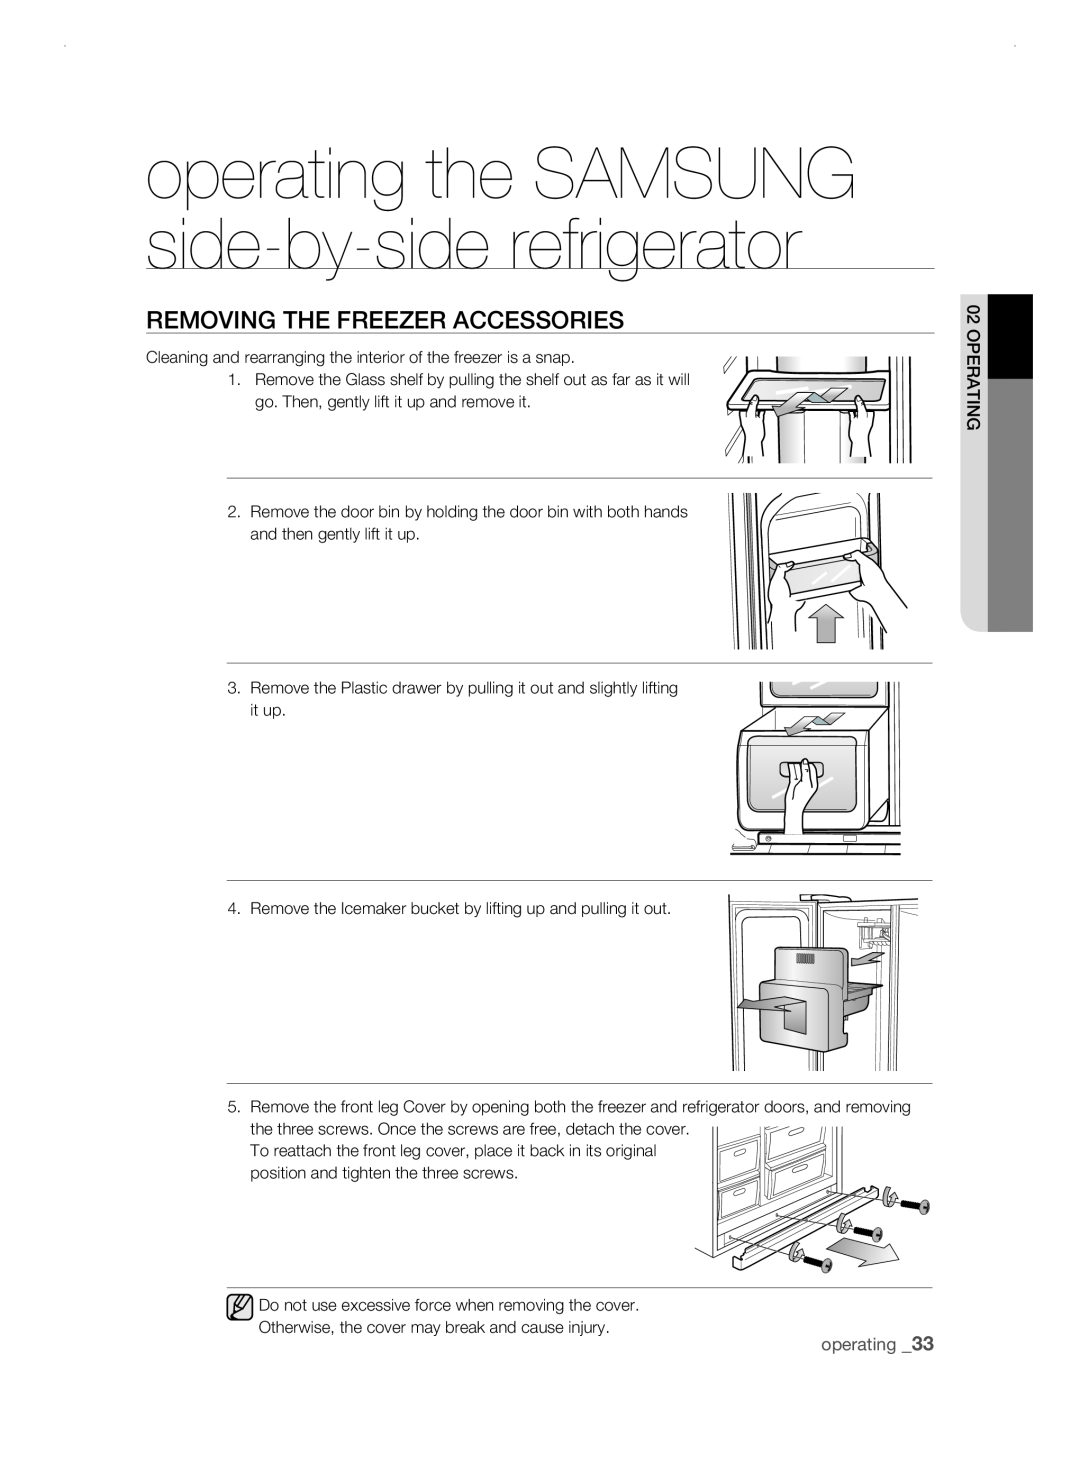 Samsung RSH3F, RSH3N, RSH3D, RSH3K rEMoVing tHE frEEZEr aCCEssoriEs, operating the SAMSUNG side-by-side refrigerator 